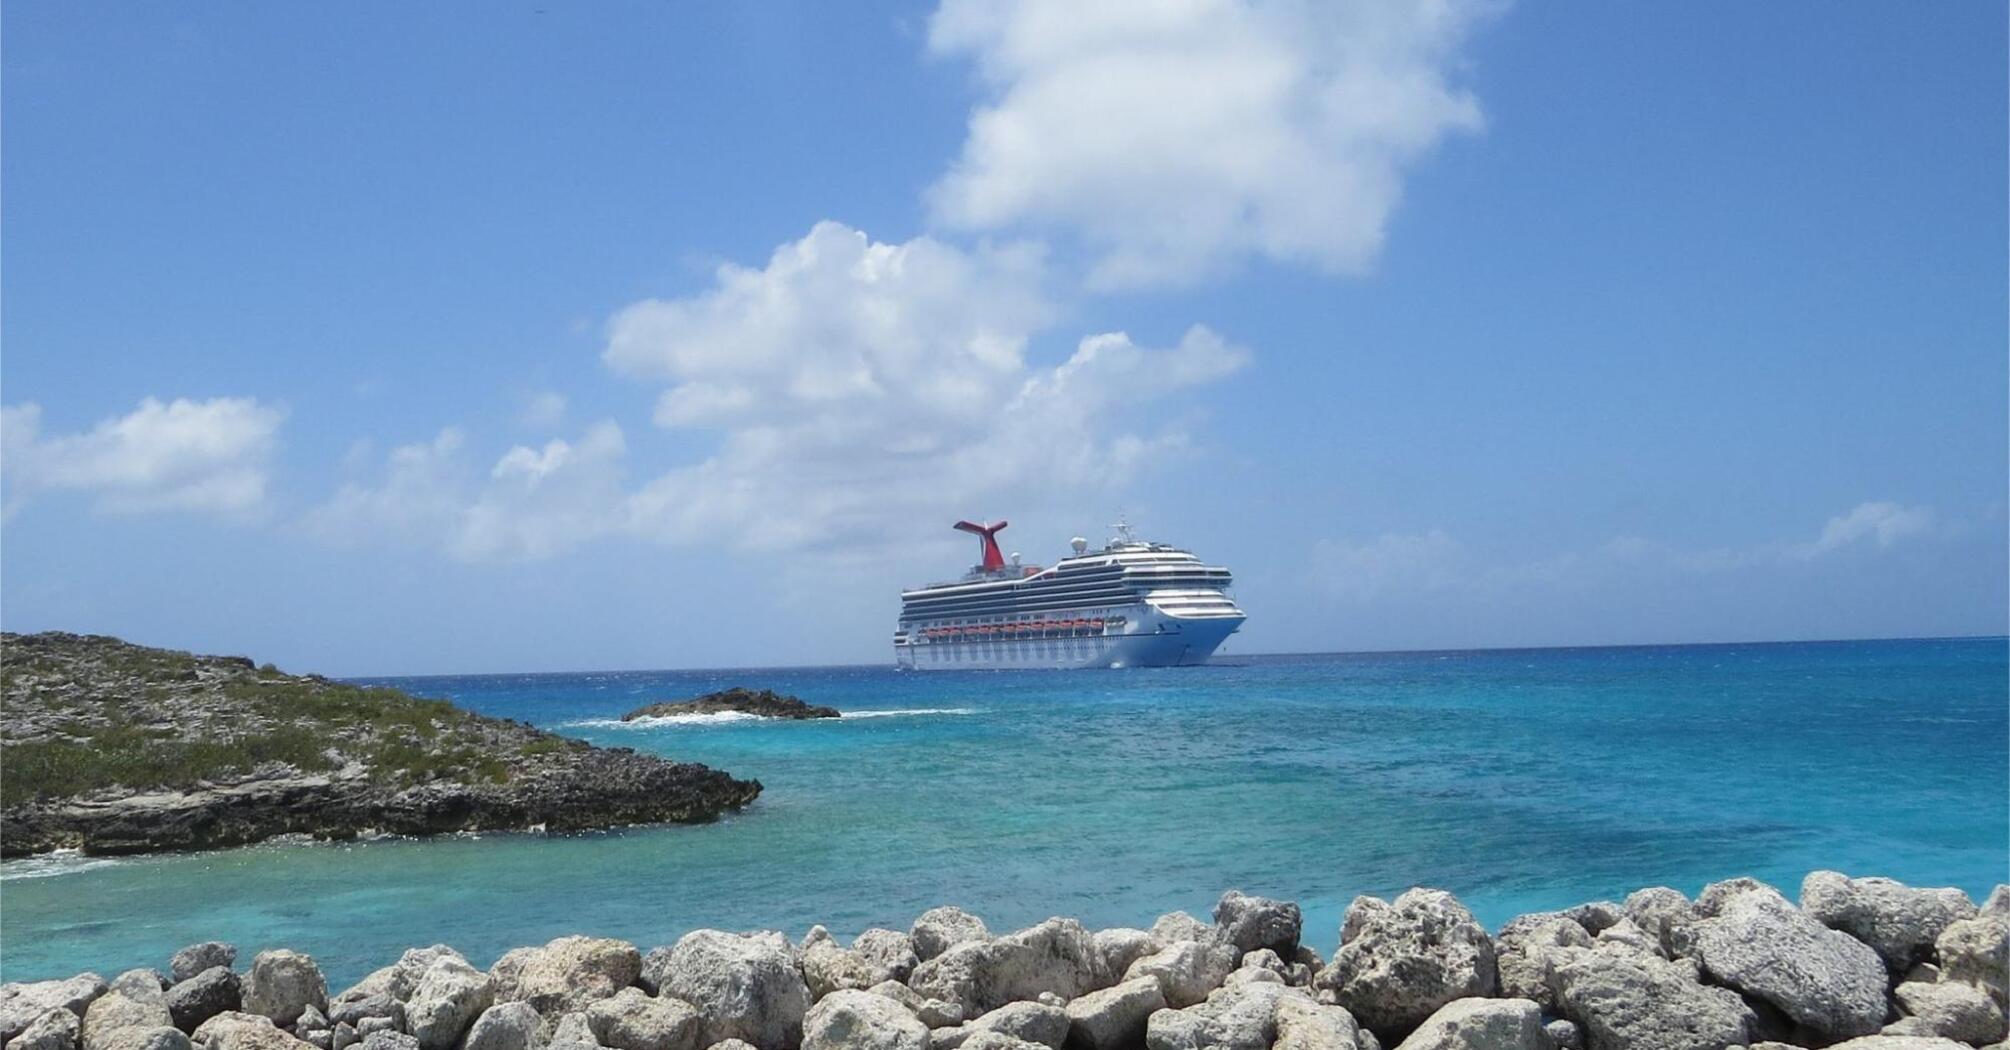 View of a cruise ship from the Bahamas